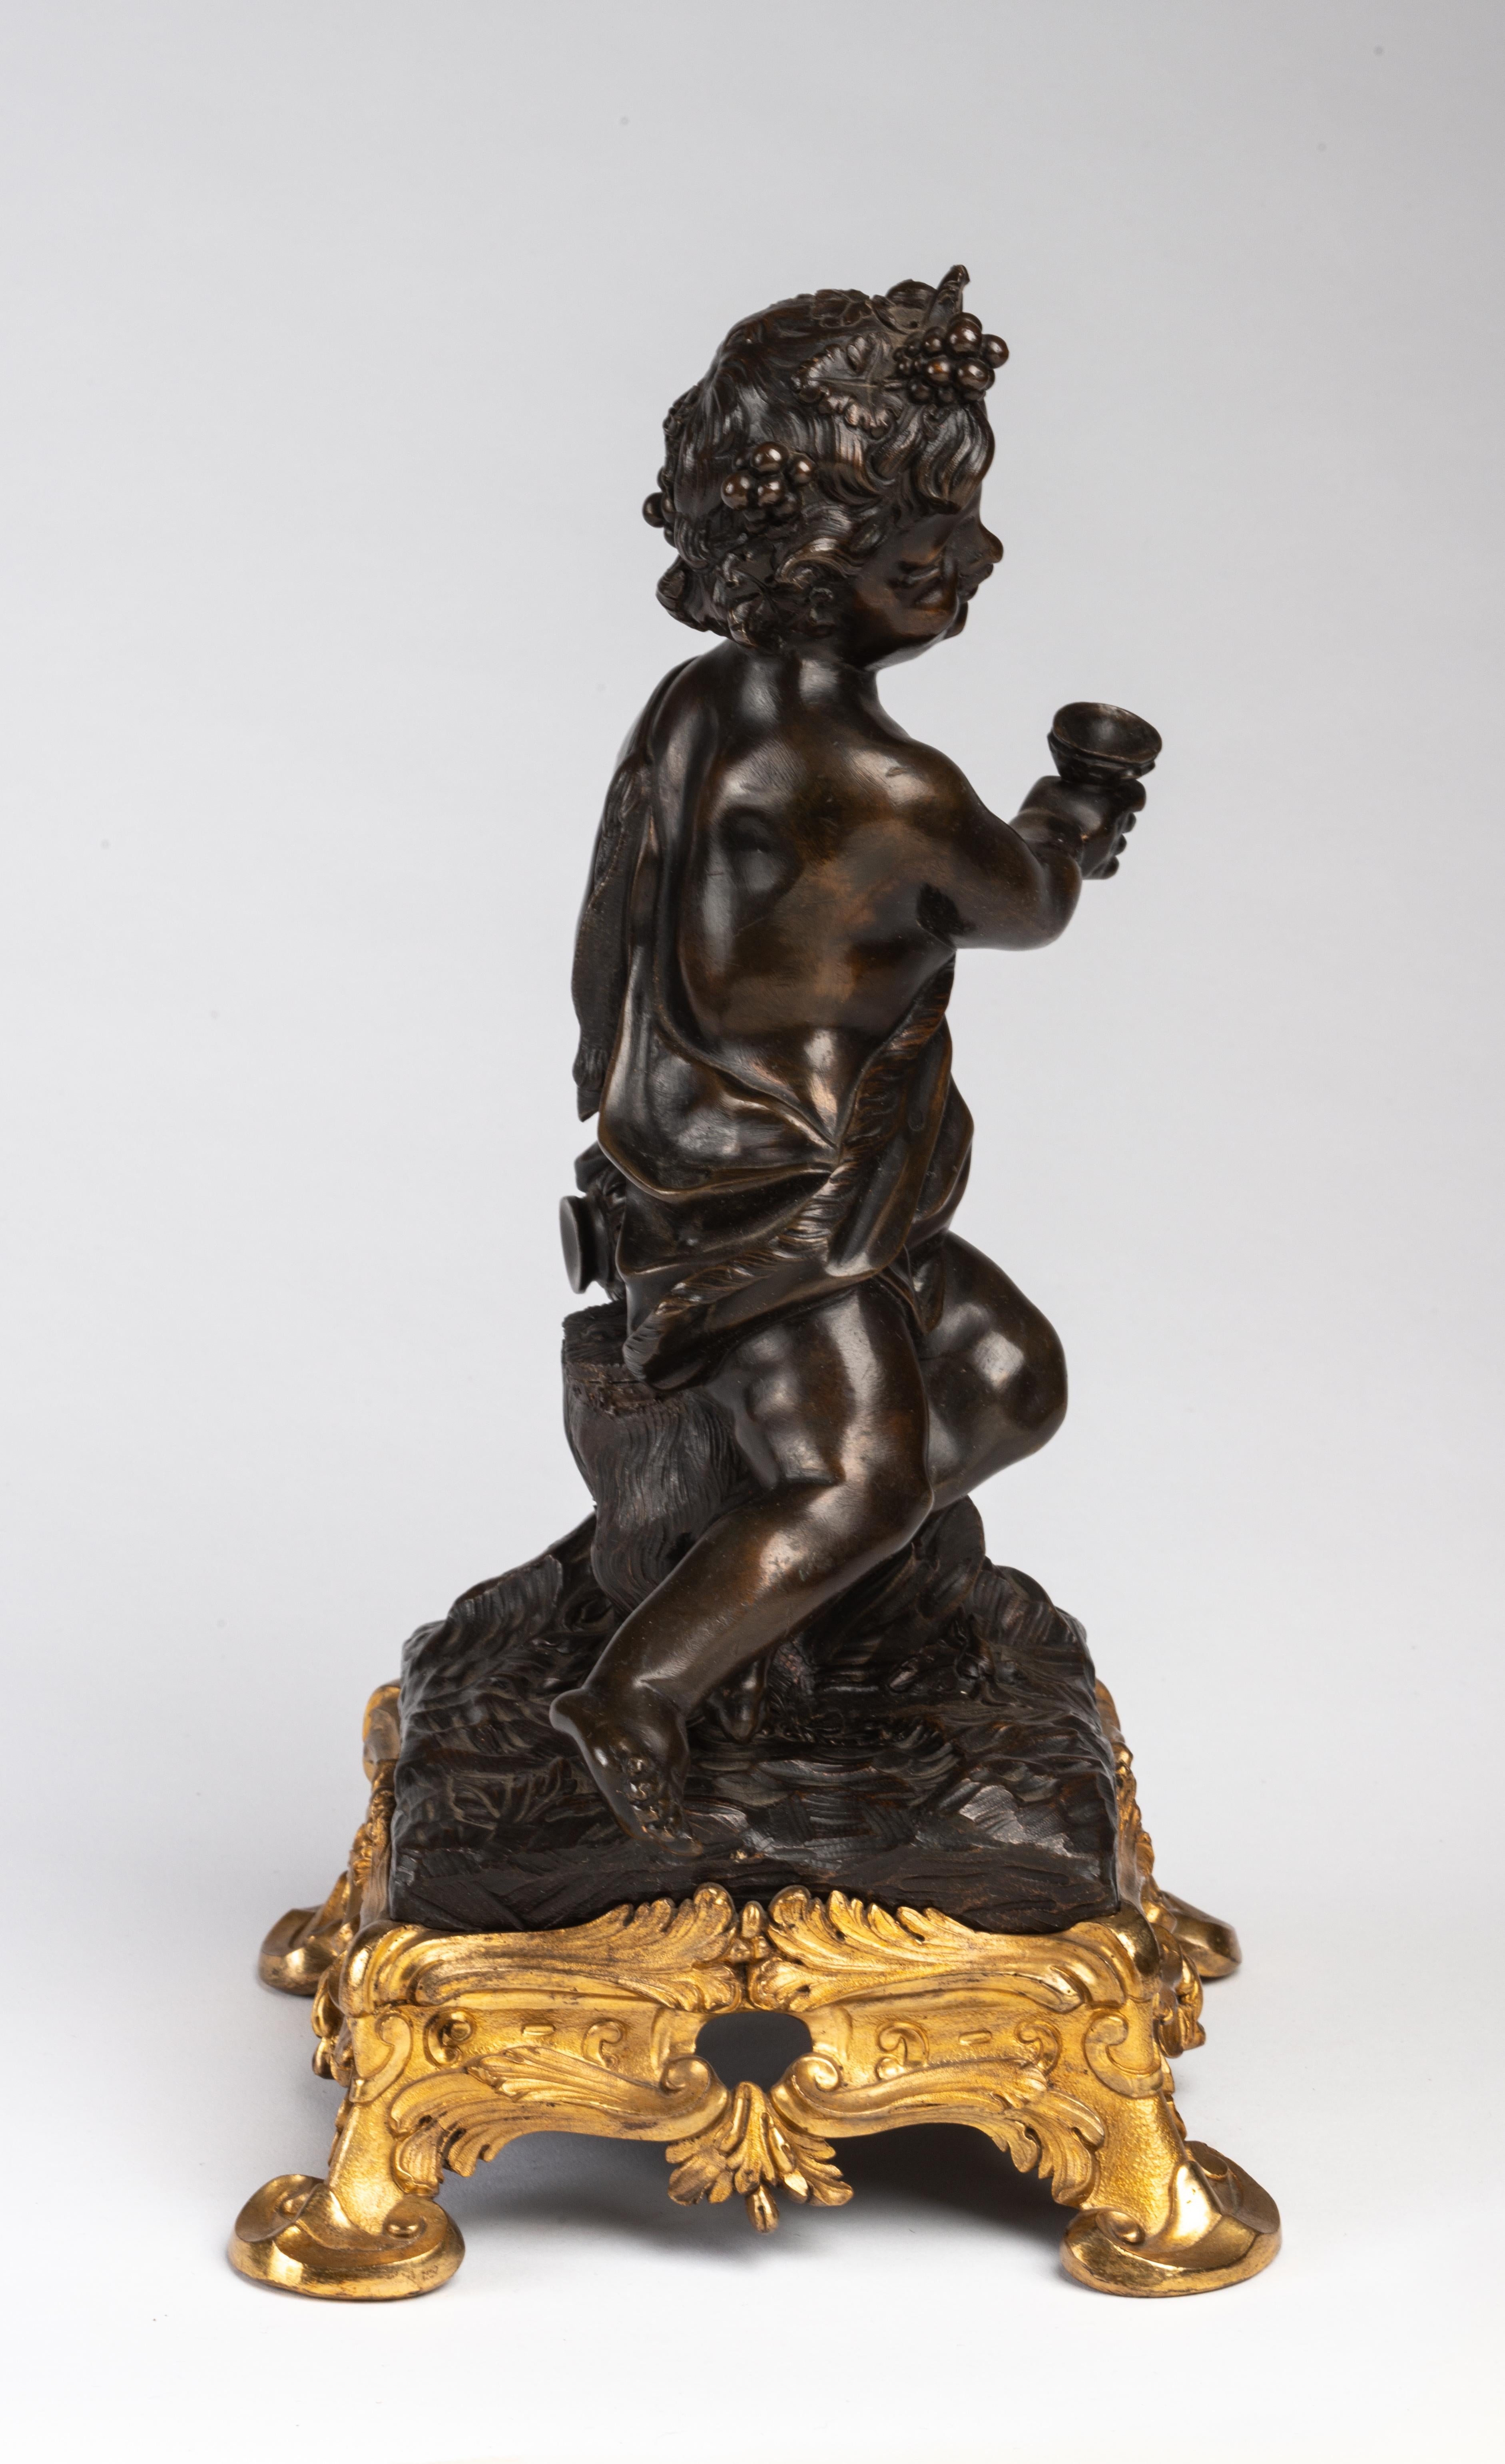 With a figure of a child dressed as a Bacchic figure with grape-leaf entwined hair and holding a cup while leaning on a bottle, raised on a scrolled rocaille base.
With an interesting provenance, Mrs. Douglas Dillon, wife of The Honorable C.